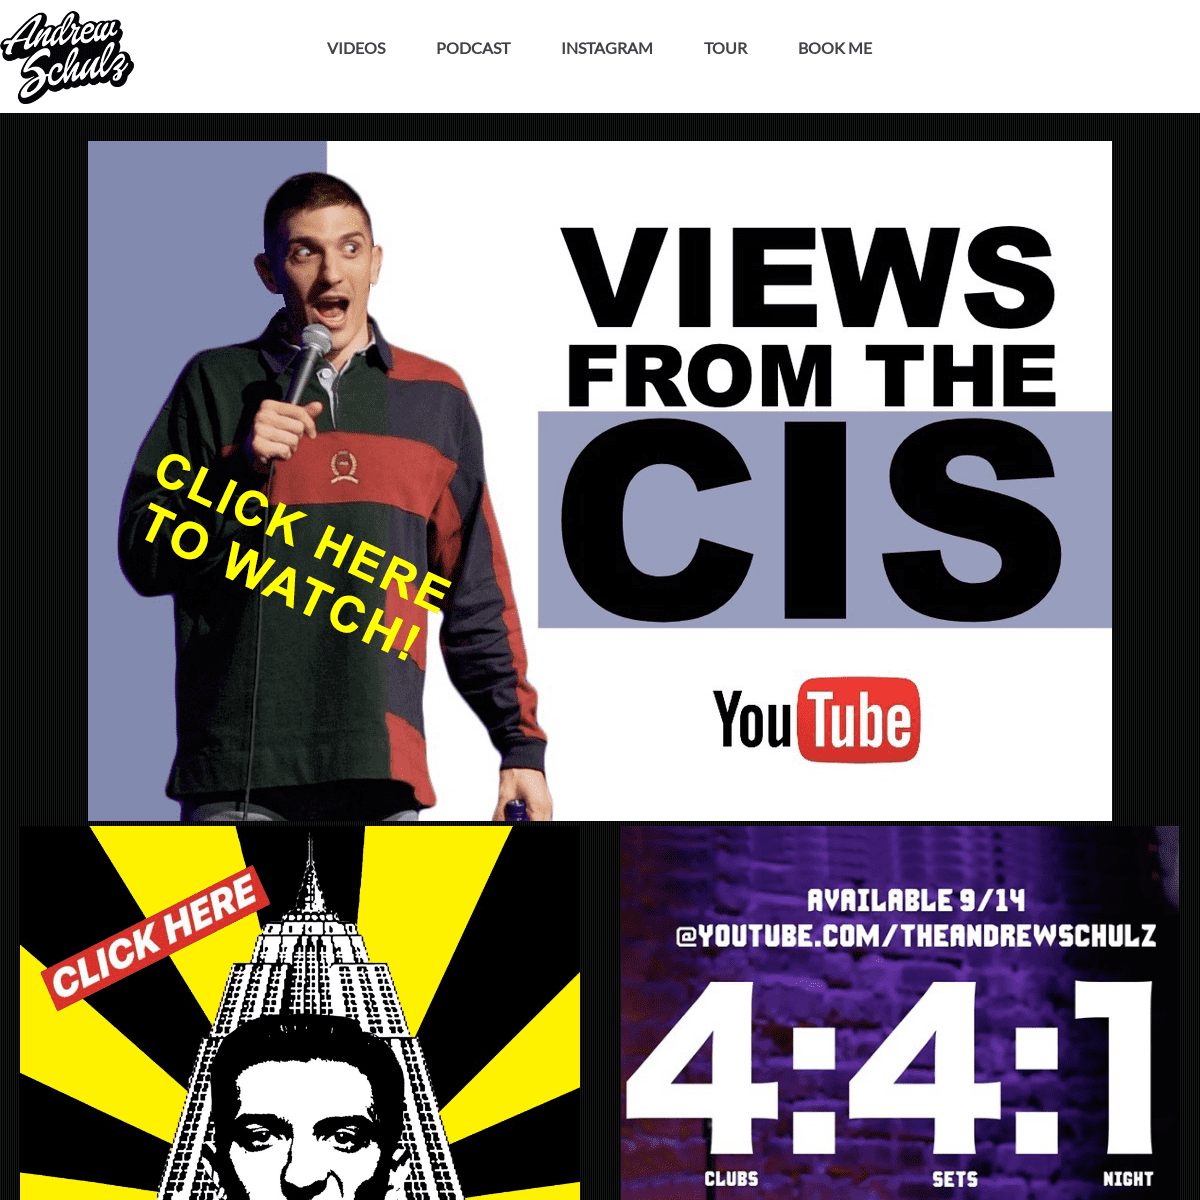 A complete backup of theandrewschulz.com